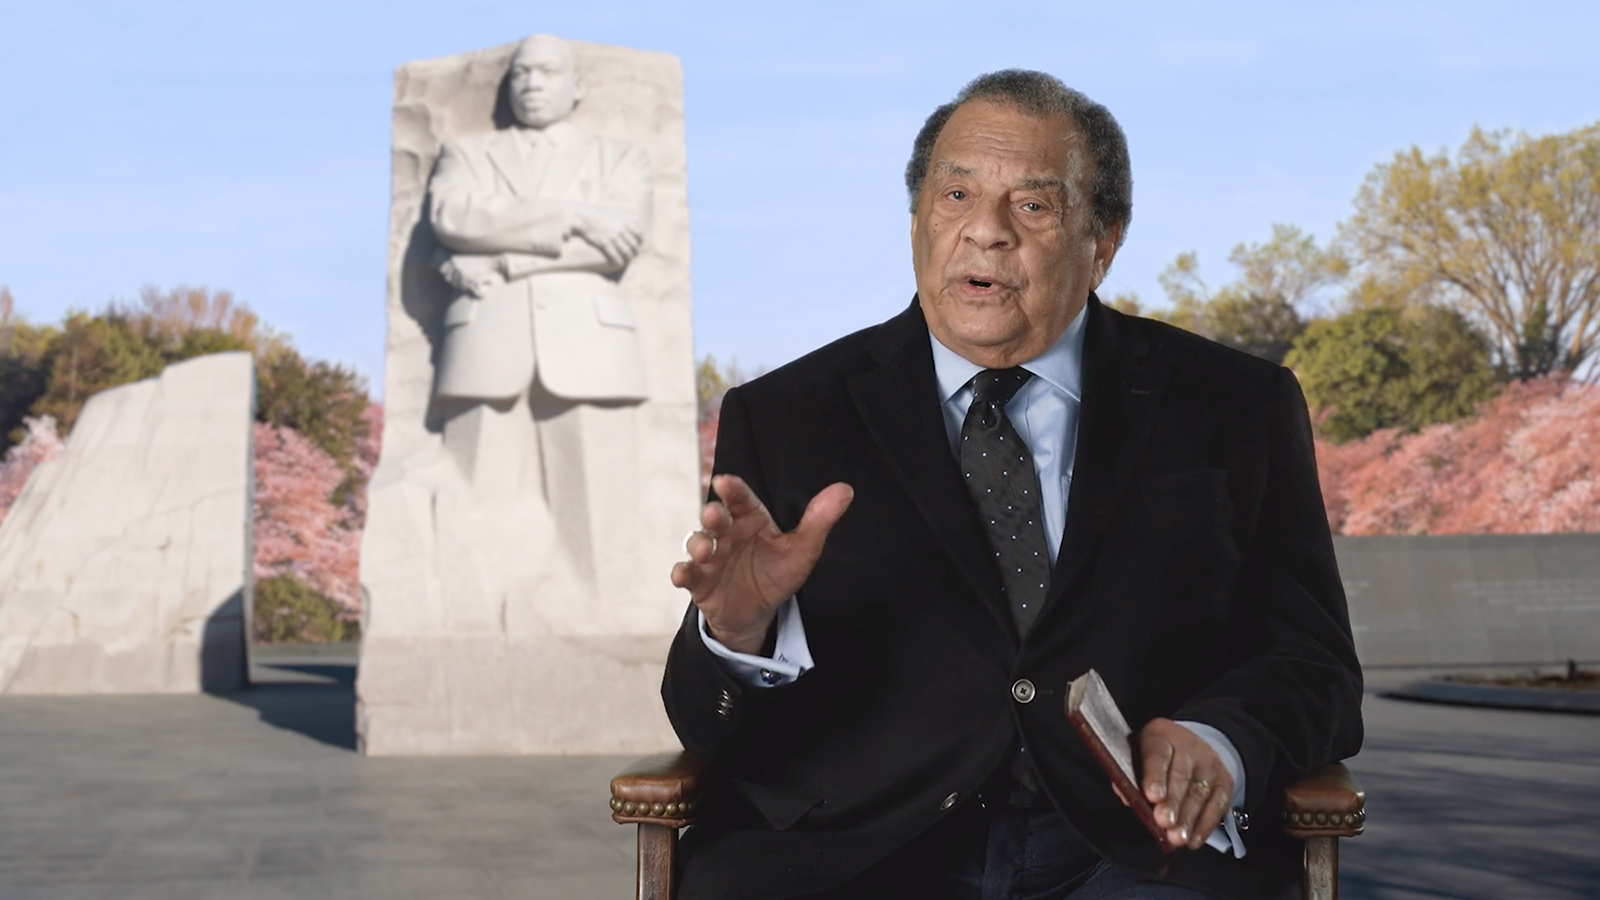 Andrew Young, civil rights leader and former ambassador to the United Nations, speaks during the the 2021 National Prayer Breakfast. Video screengrab